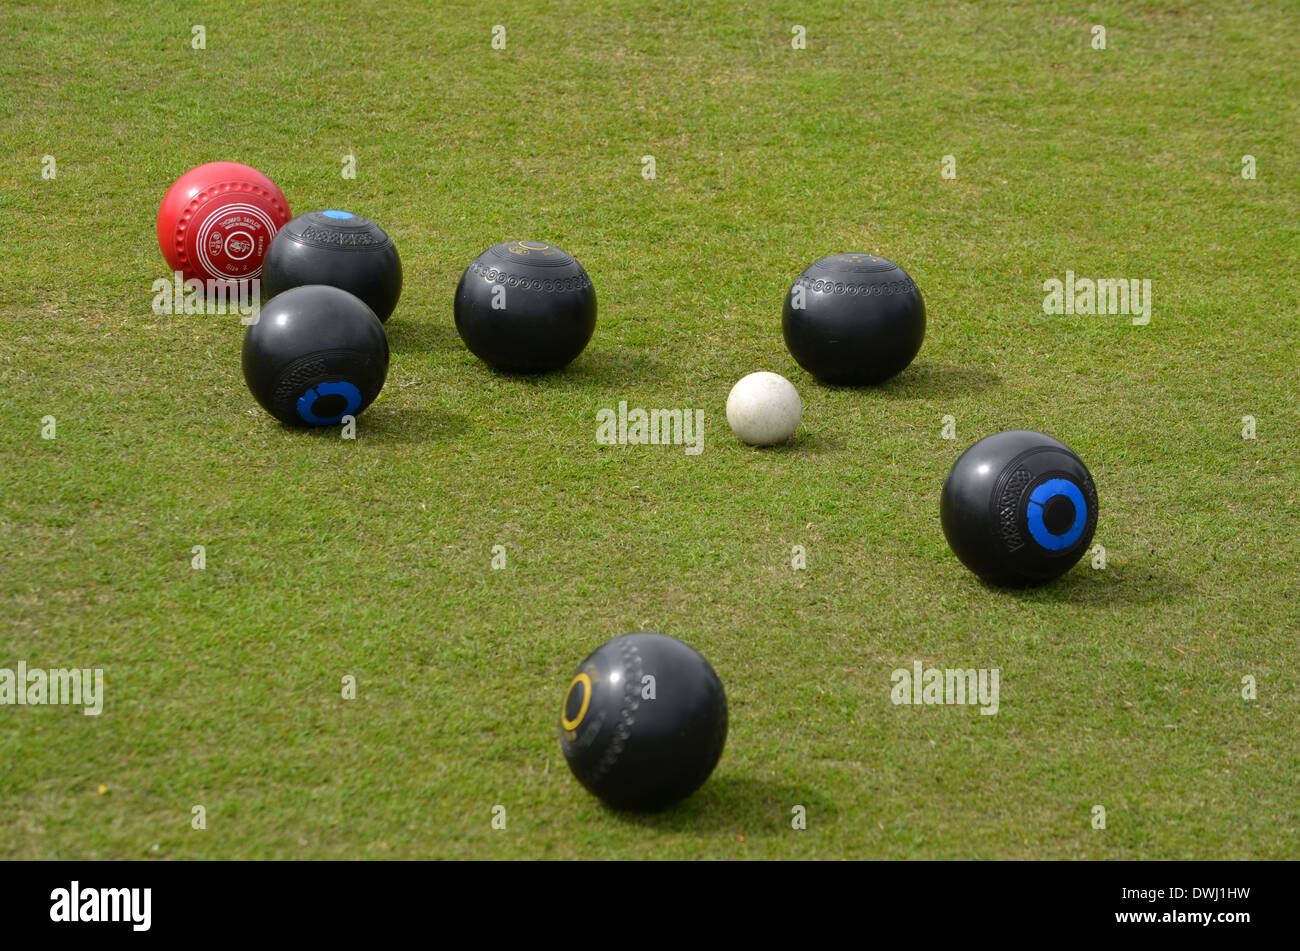 Game of bowls Stock Photo